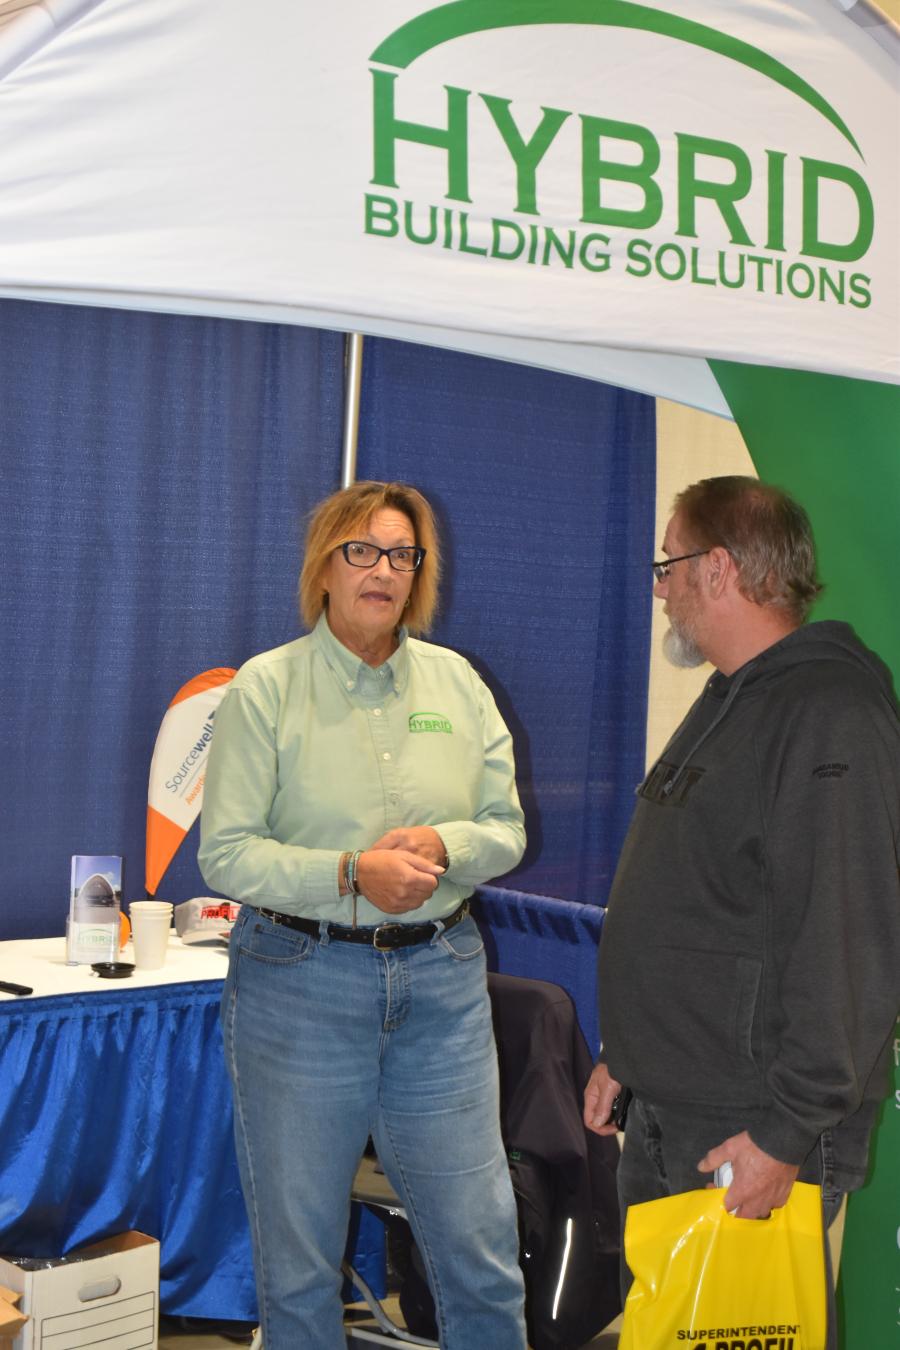 Mary Louise Merkwa of Hybrid Building Solutions speaks with an Expo attendee. Hybrid Building Solutions is well known across the state for its salt and machine storage structures.
(CEG photo)